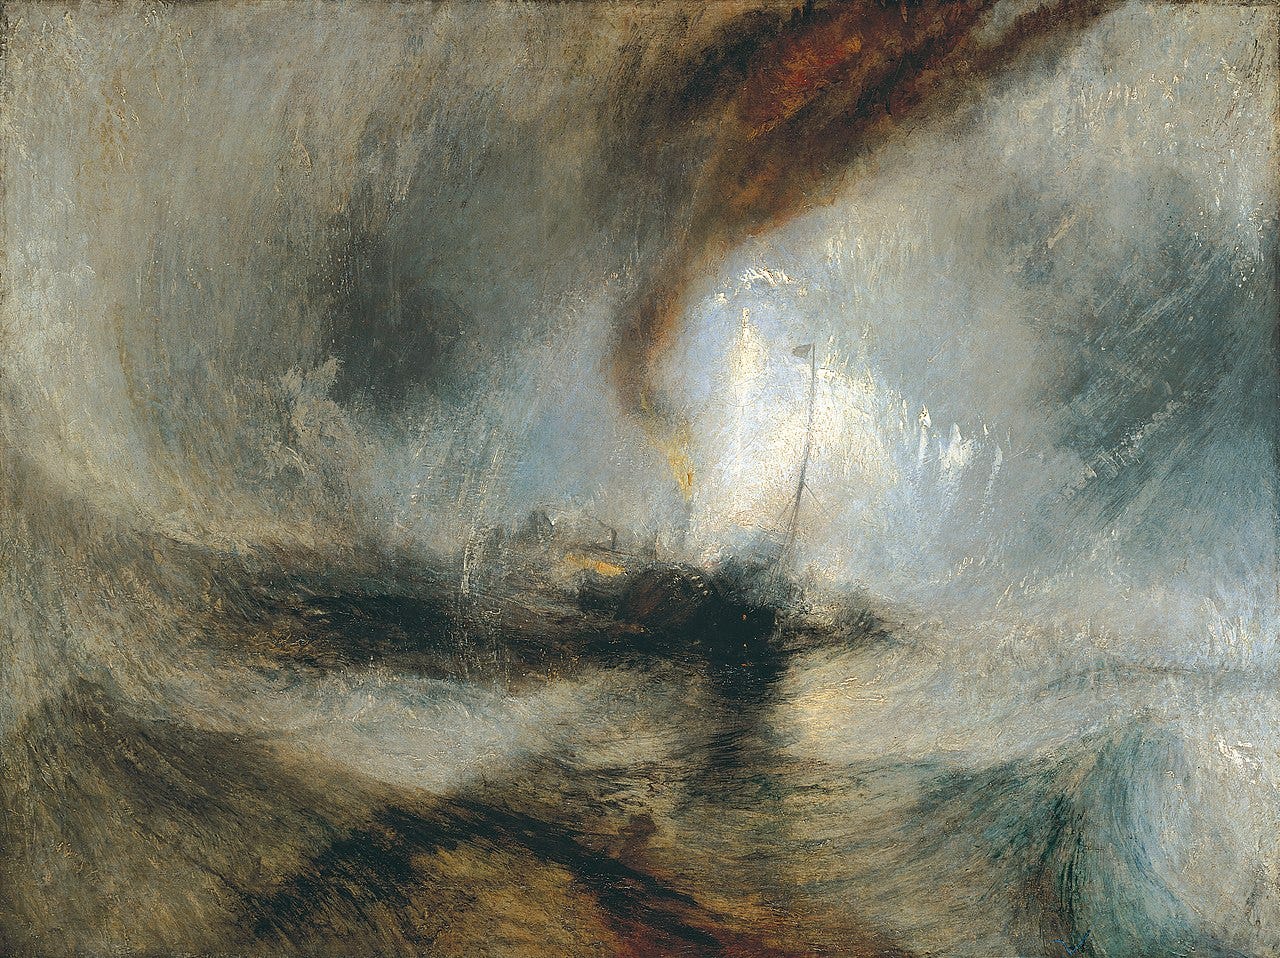 In this indistinct seascape painting, a ship appears to be sinking in the midst of a storm. The sea and sky are dark and smoky.